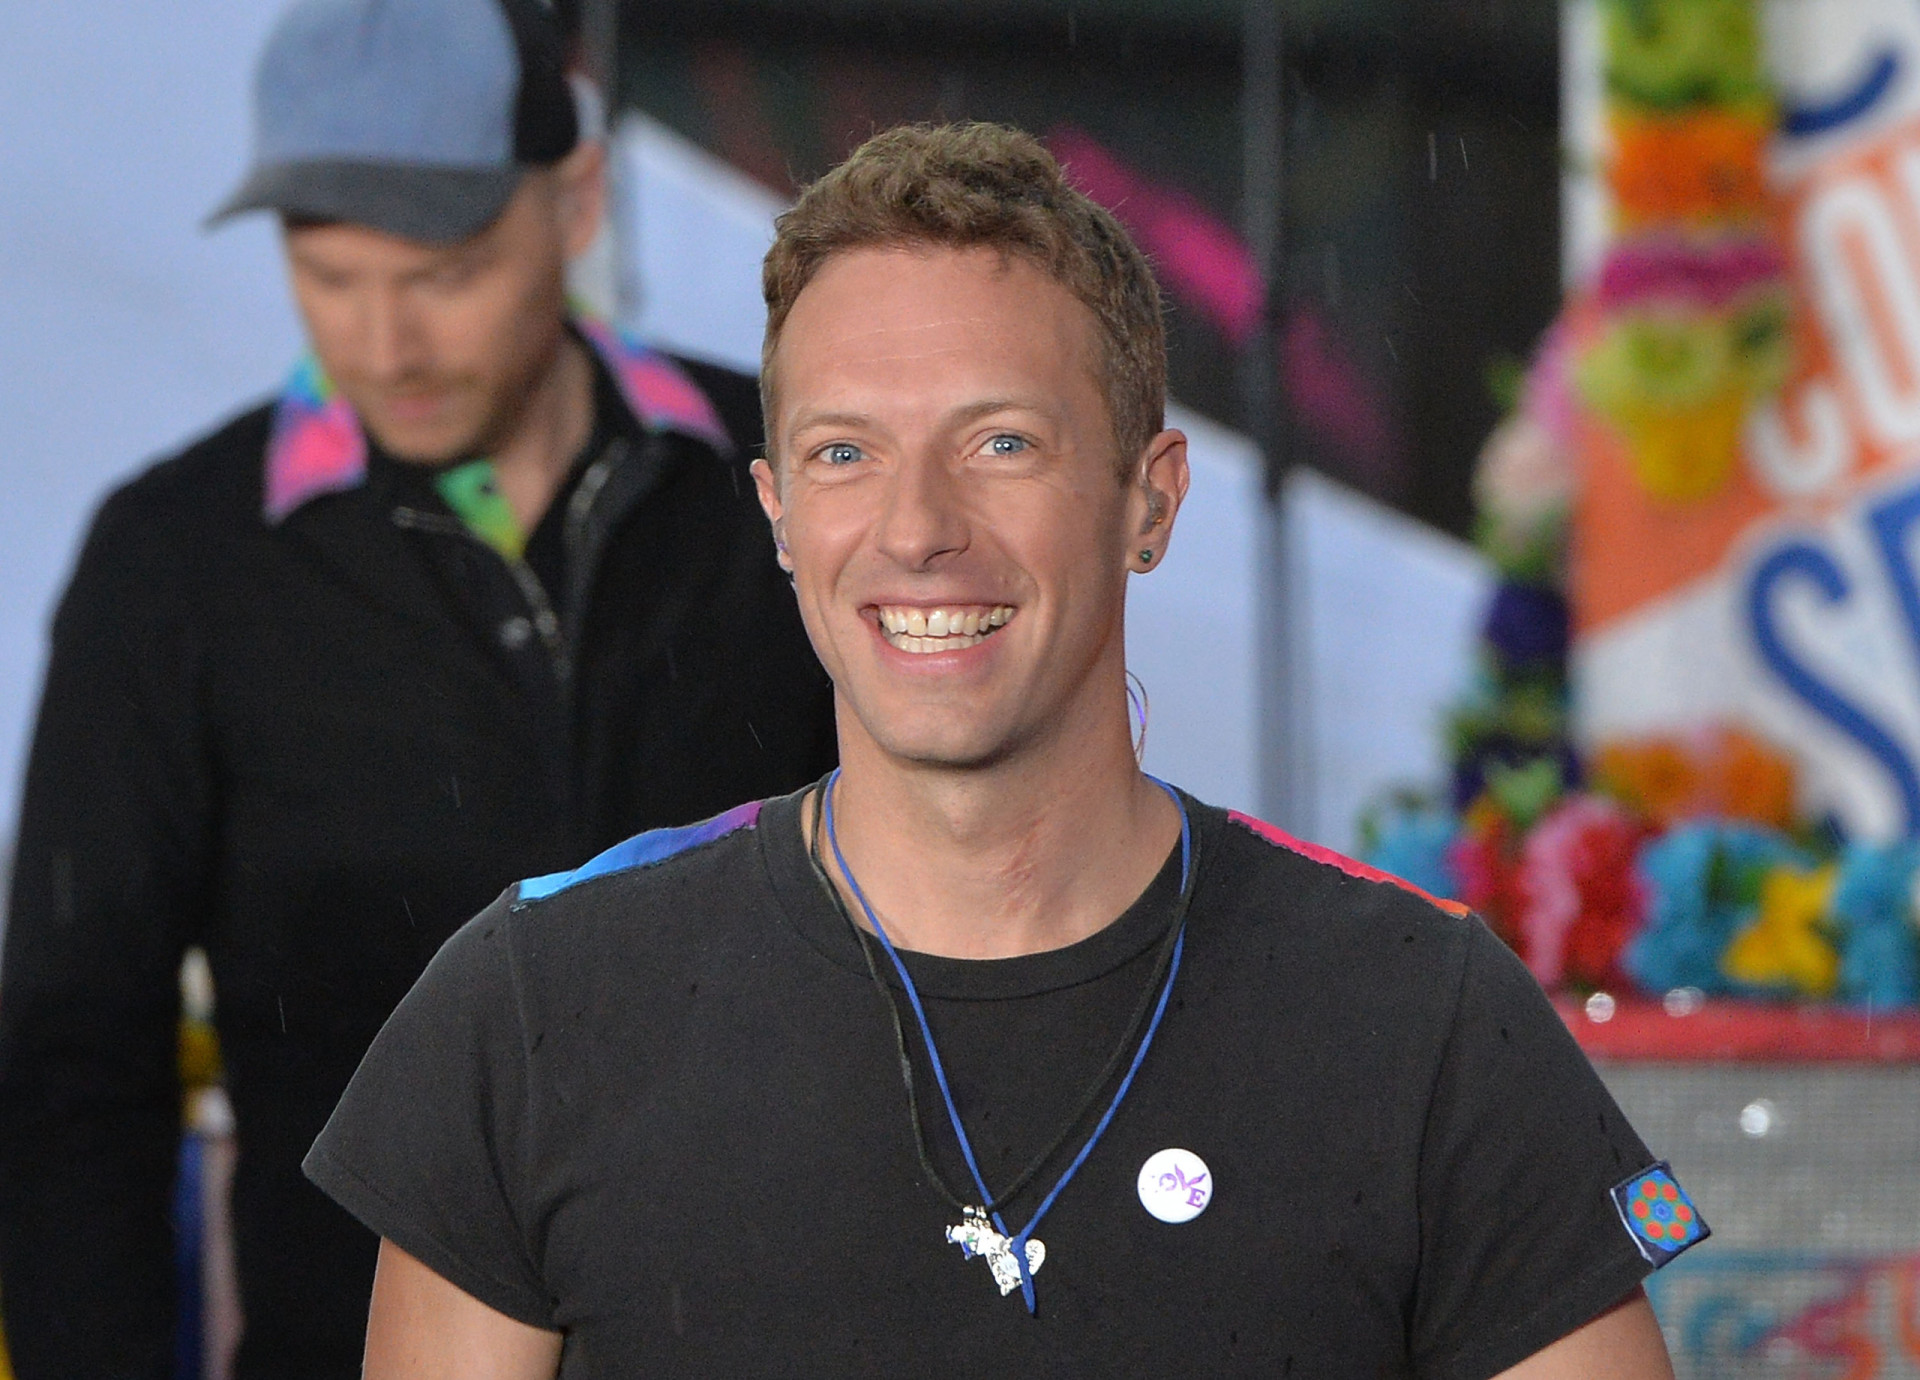 <p>Born under the compassionate sign of Pisces, Chris Martin's tarot cards embody his soulful melodies and humanitarian spirit.</p><p><a href="https://www.msn.com/en-us/community/channel/vid-7xx8mnucu55yw63we9va2gwr7uihbxwc68fxqp25x6tg4ftibpra?cvid=94631541bc0f4f89bfd59158d696ad7e">Follow us and access great exclusive content every day</a></p>